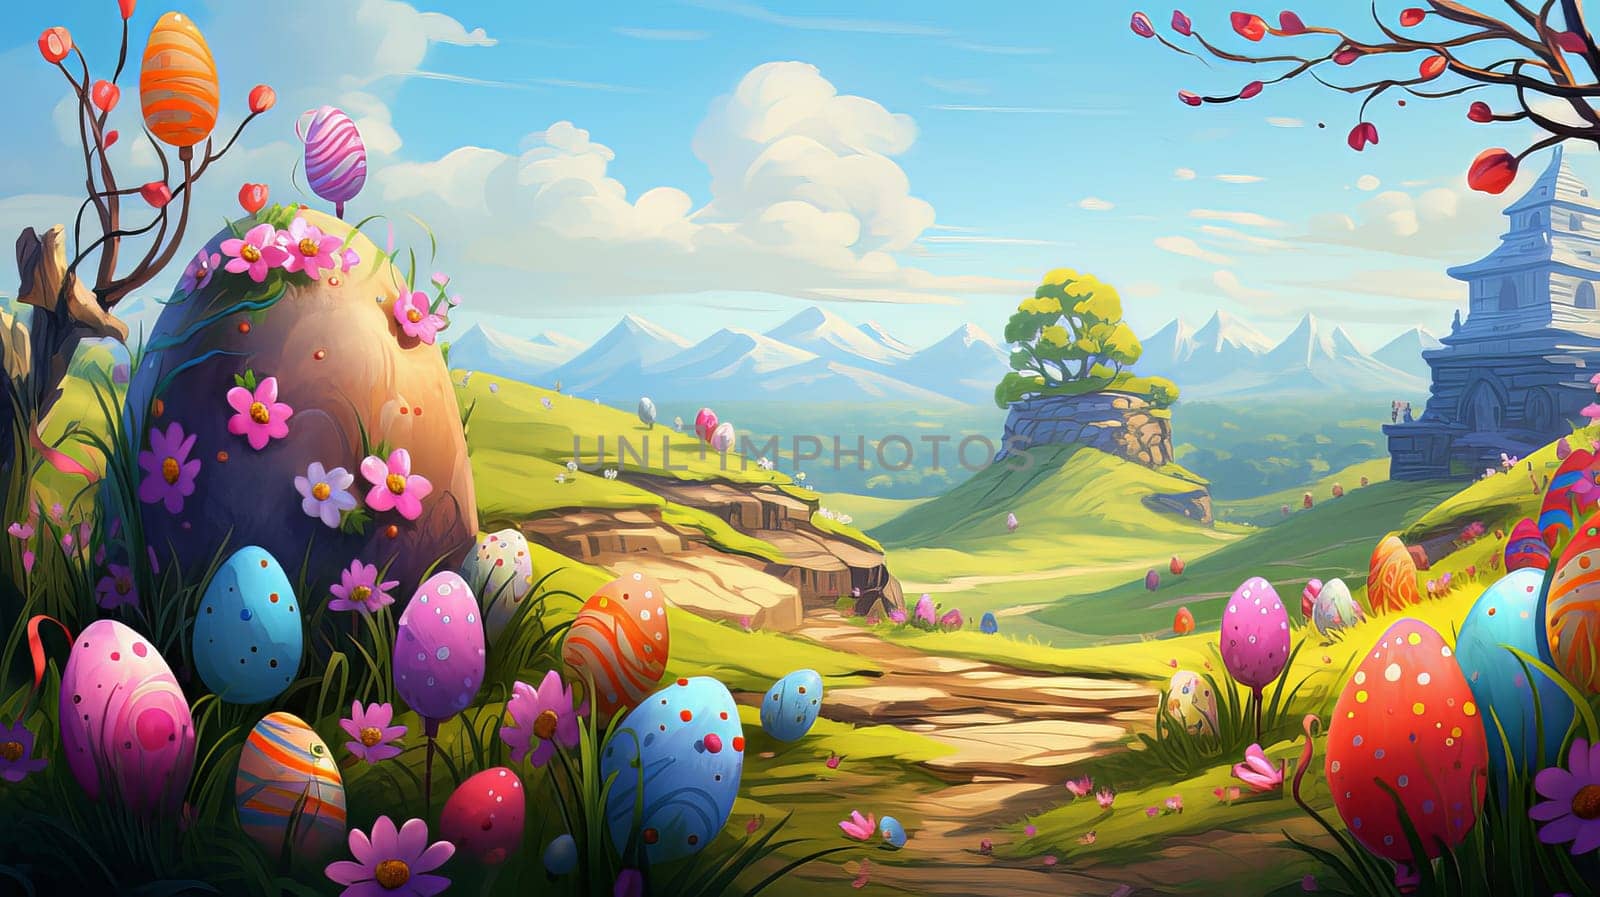 Happy Easter background with Easter eggs. High quality photo